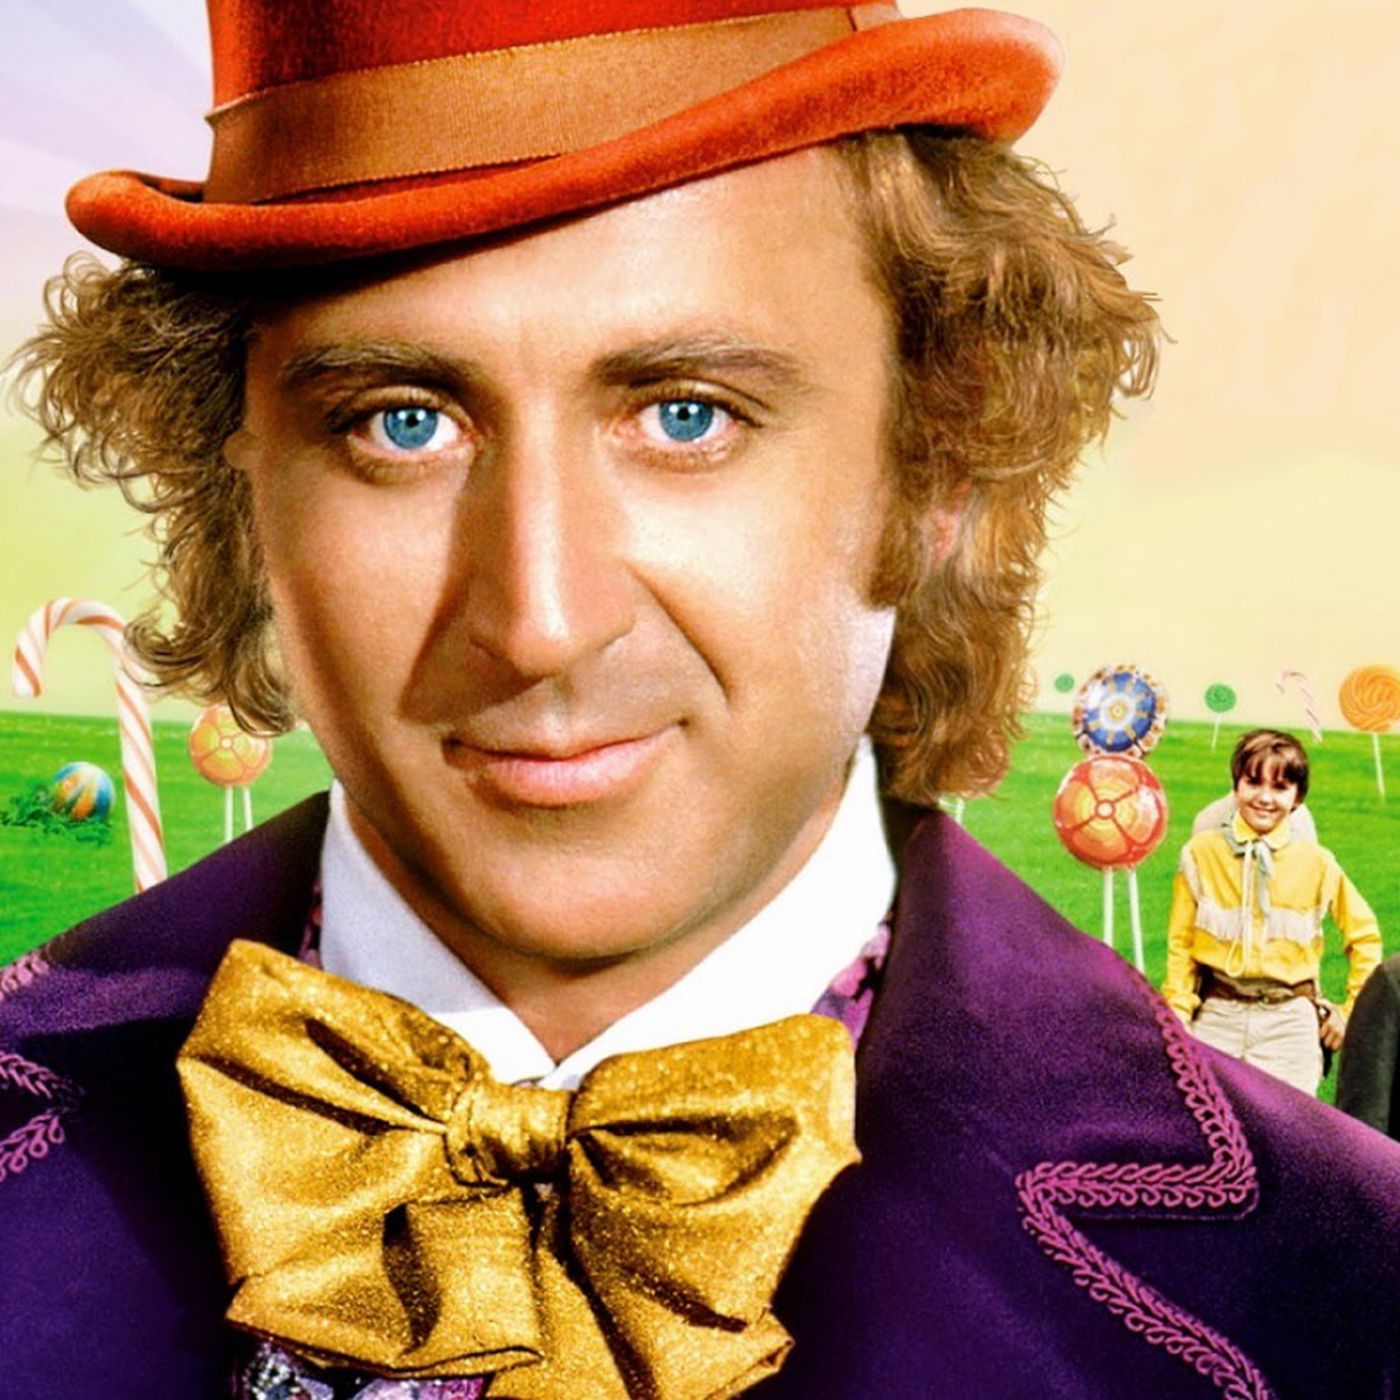 Gene Wilder as Willy Wonka, the definition of a whimsical character according to blogger Gail Hanlon from Is This Mutton